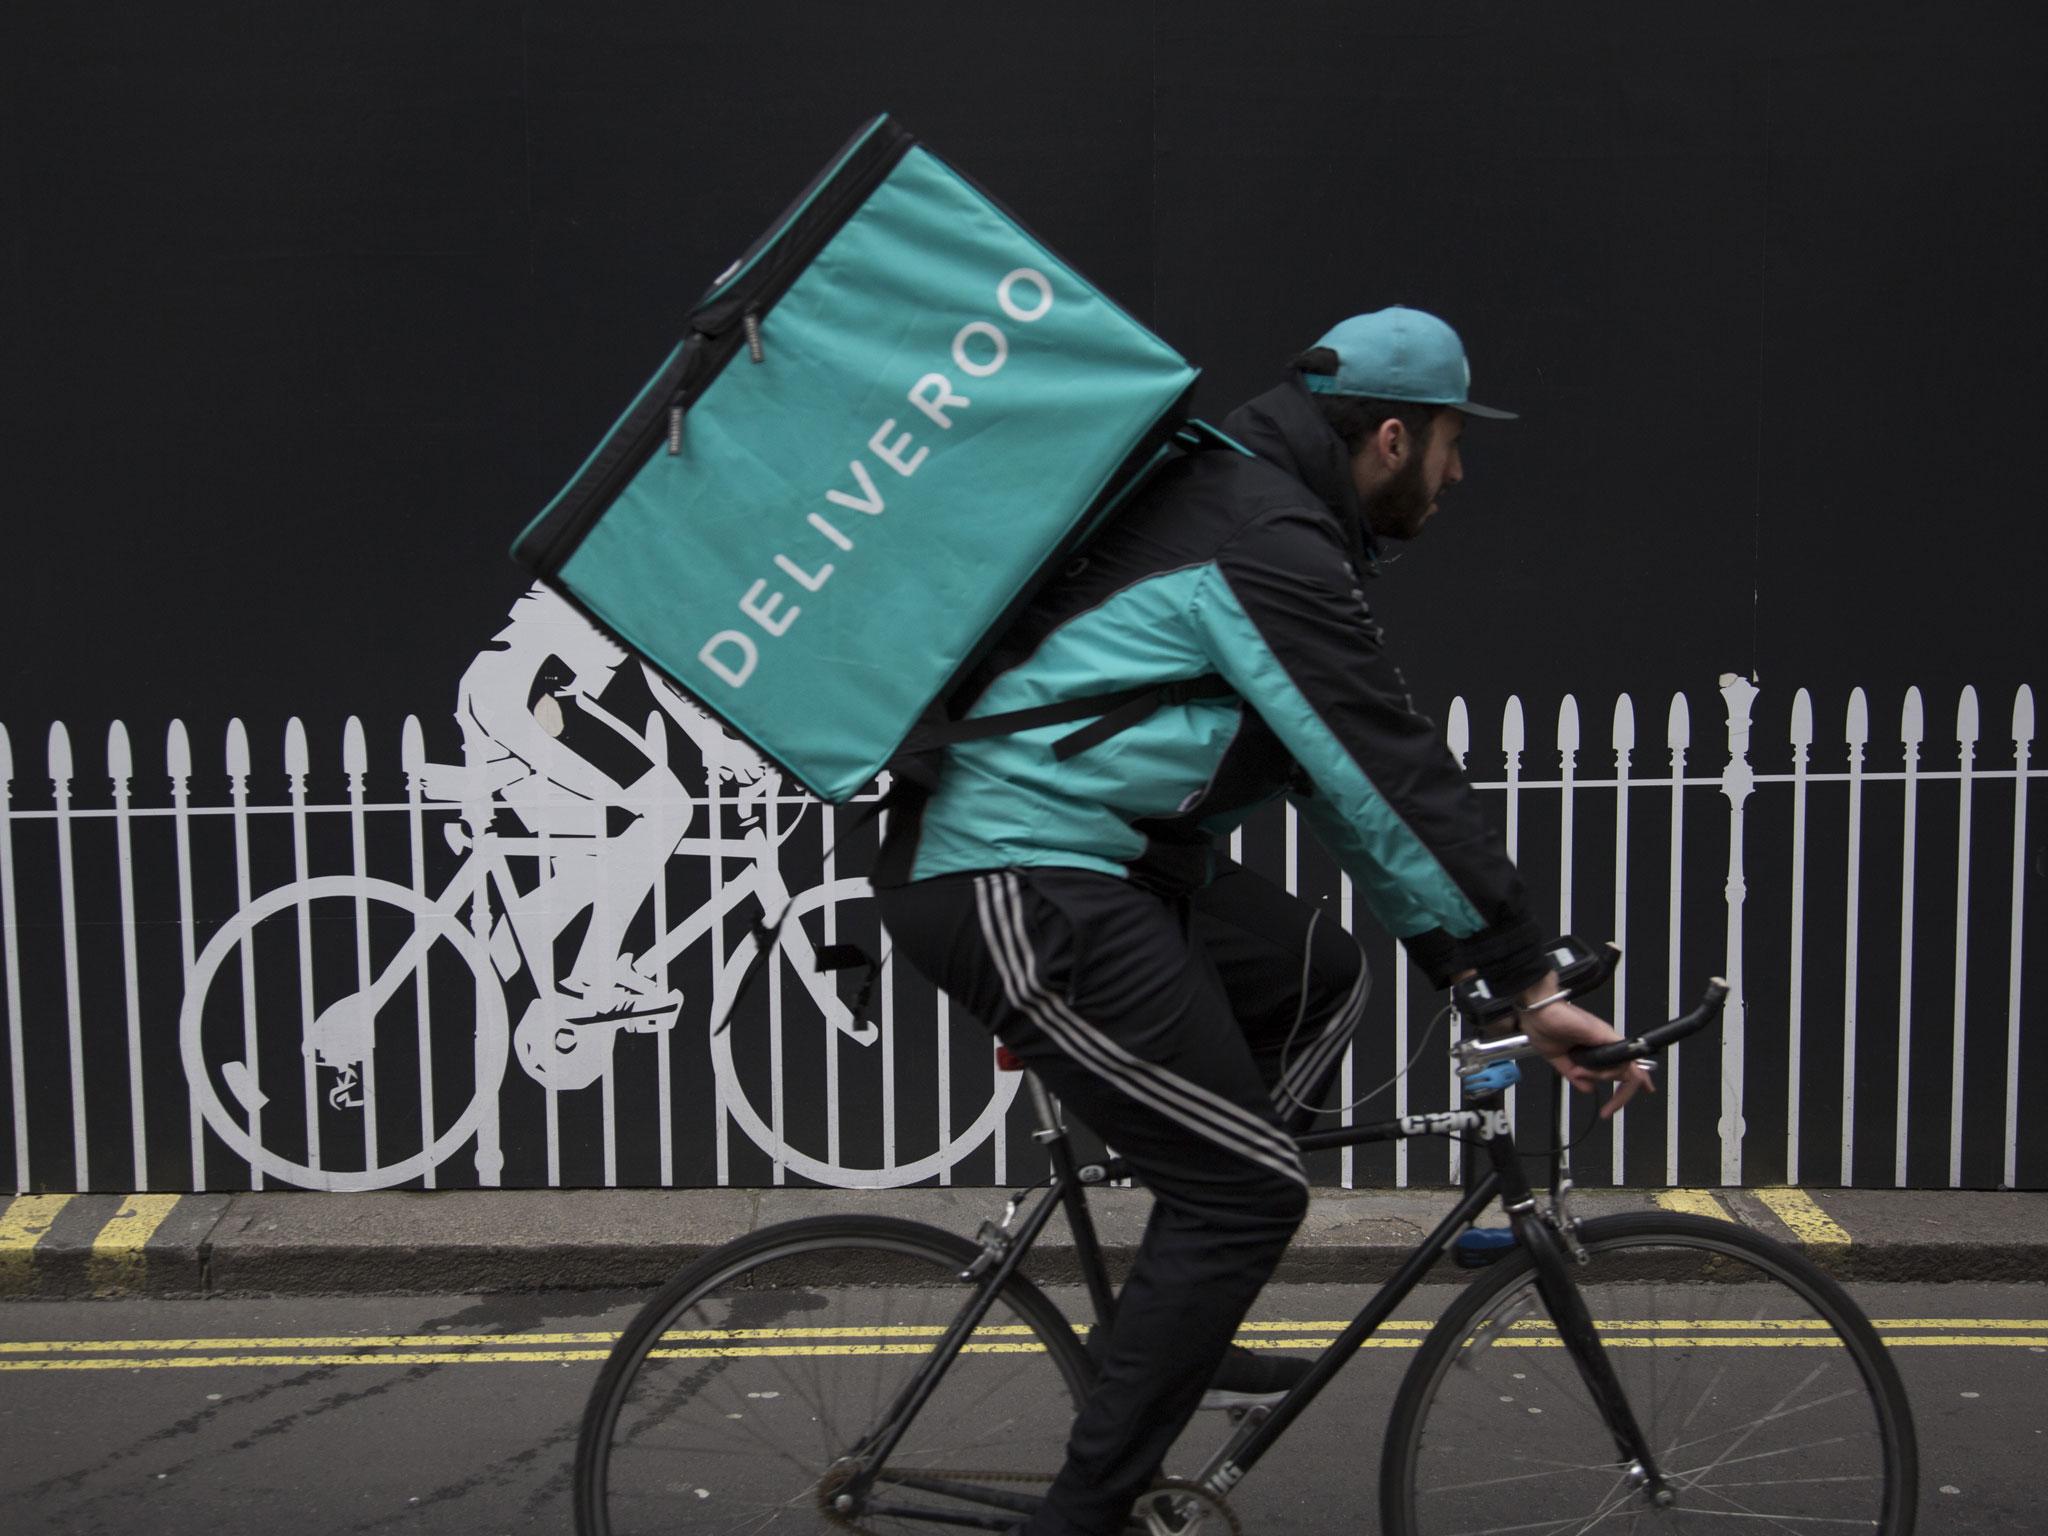 Deliveroo couriers say Emmanuel Macron's new labour laws will impact food delivery couriers with more job insecurity